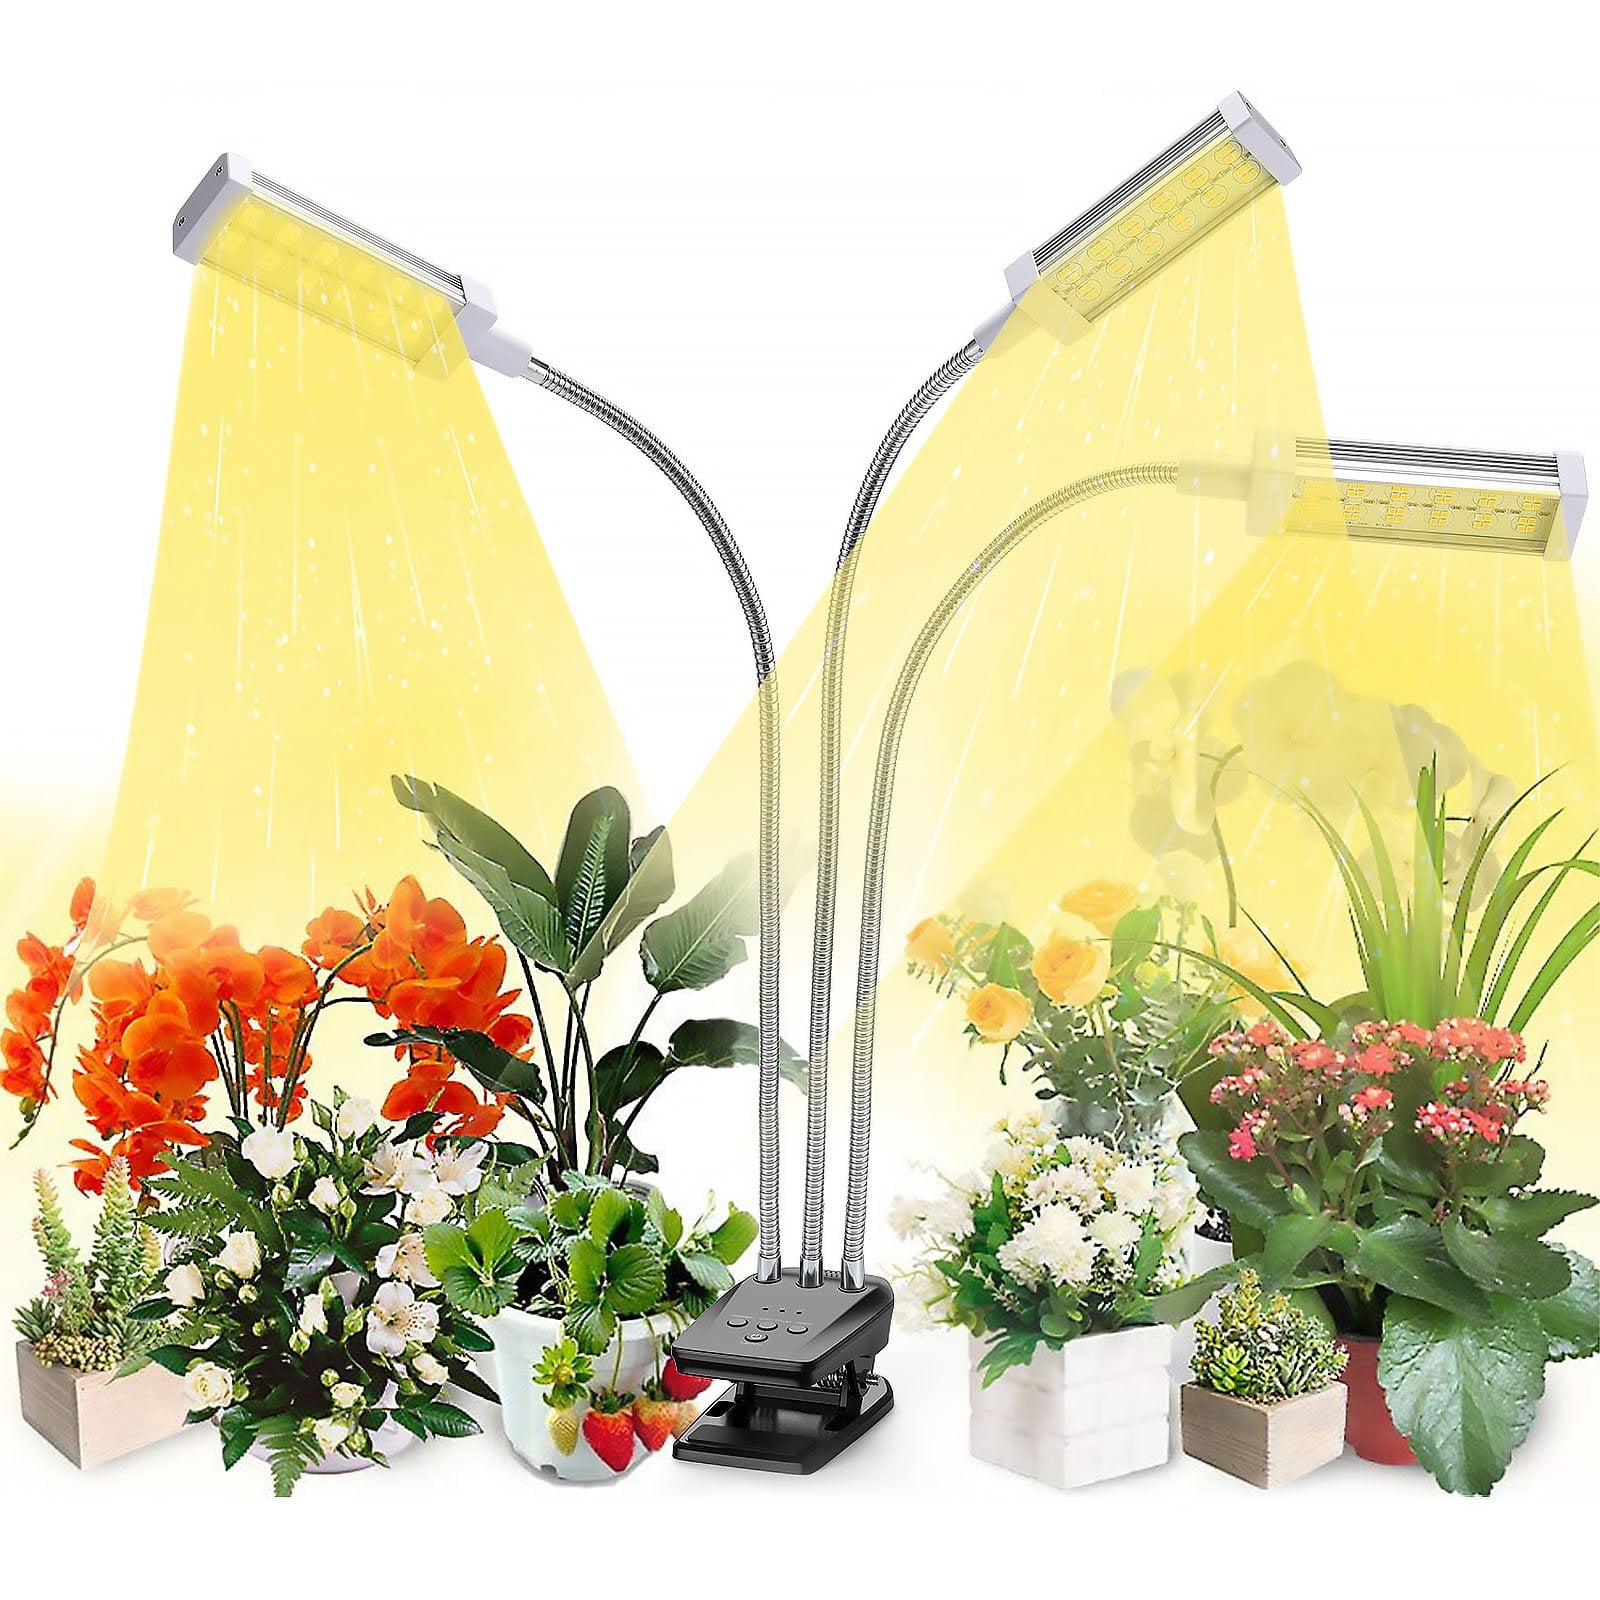 Details about   Plant Grow Lights Indoor 2 Head LED Clip-on Plant Flower Lights Lamps 30W Blue 